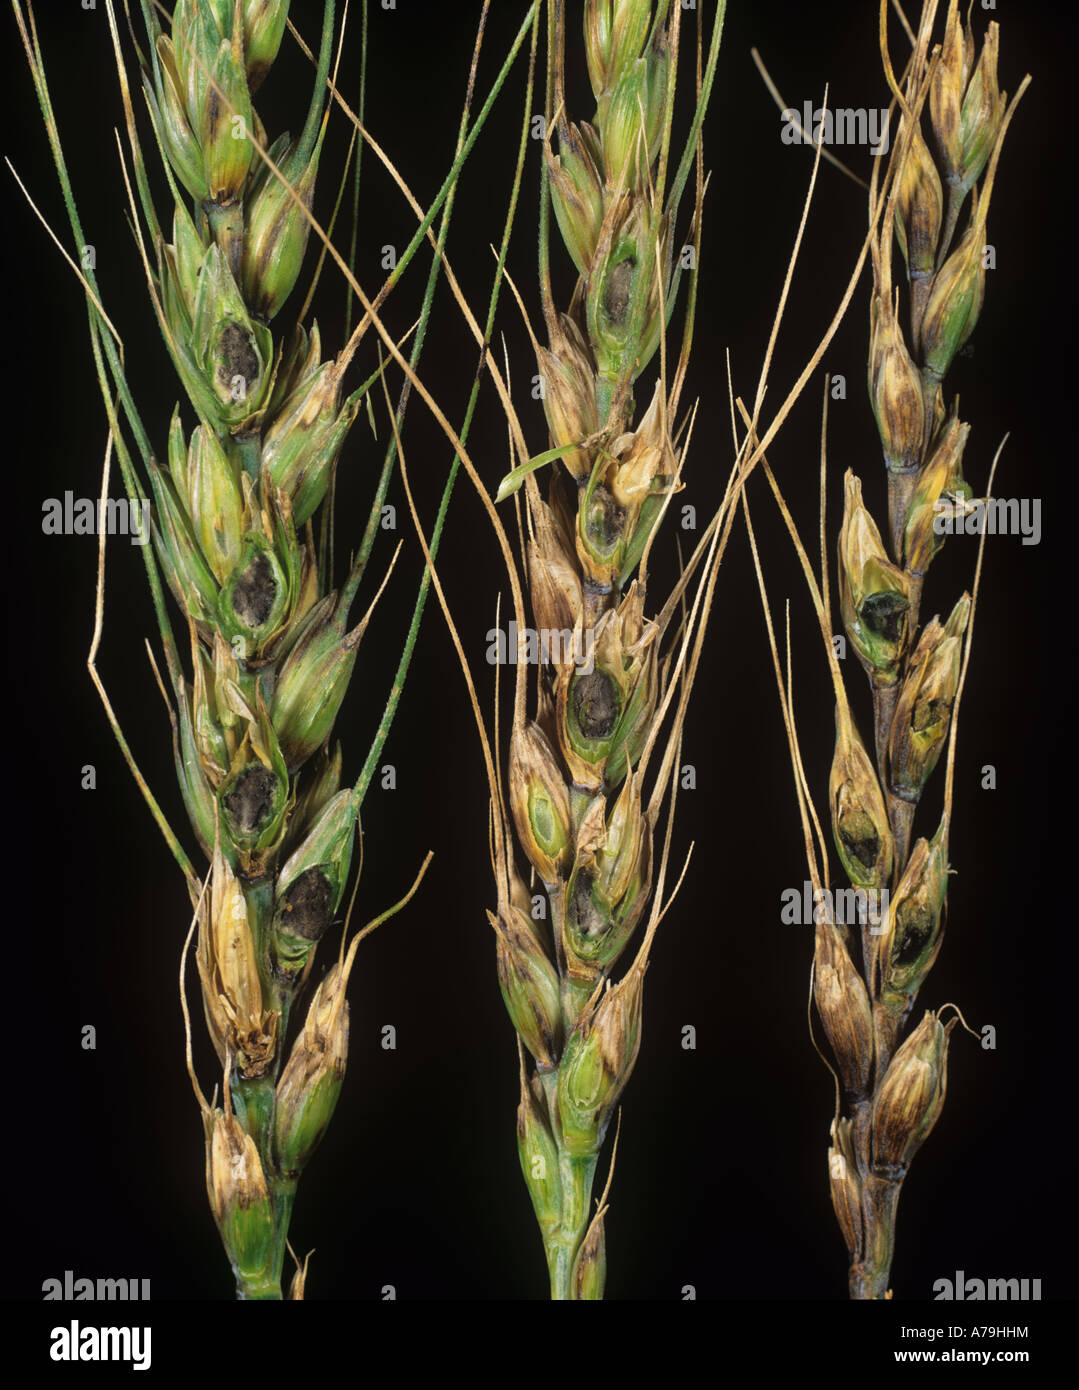 Bunt Tilletia tritici on bearded wheat grains replaced by bunt balls Stock Photo